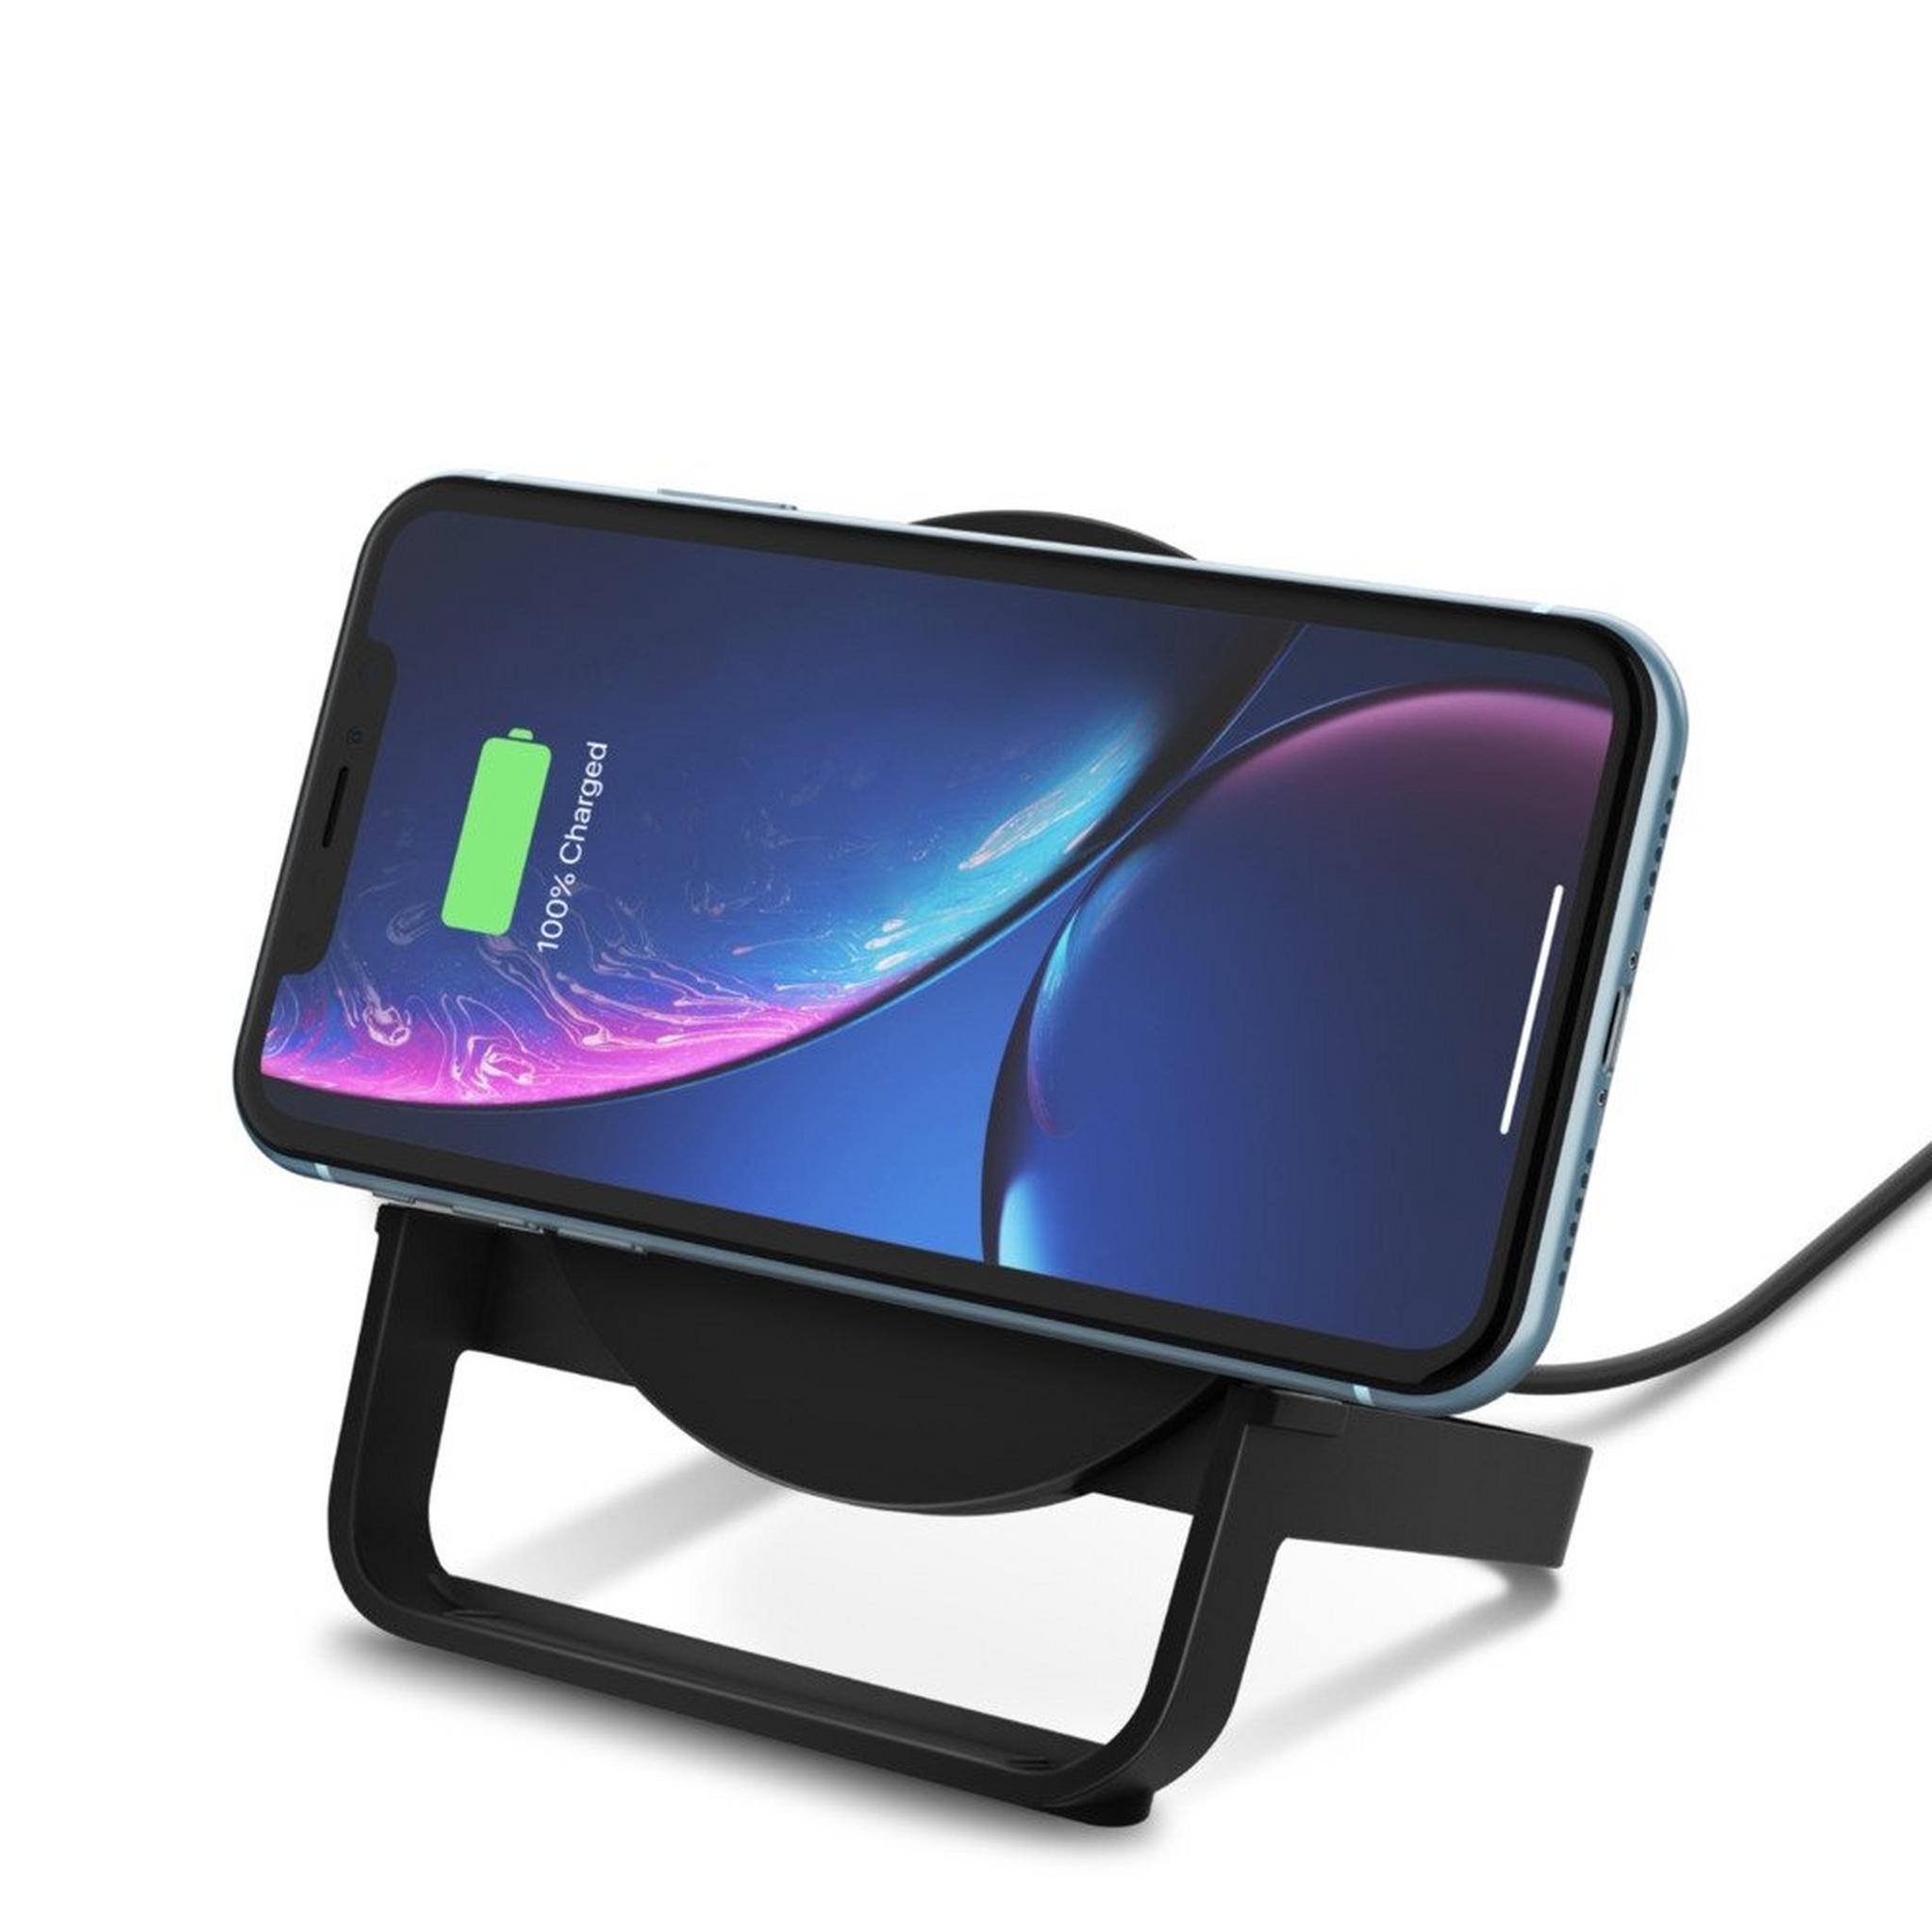 Belkin Boost Charge 10W Fast Wireless Charging Stand + Quick Charge 3.0 wall Charger - Black